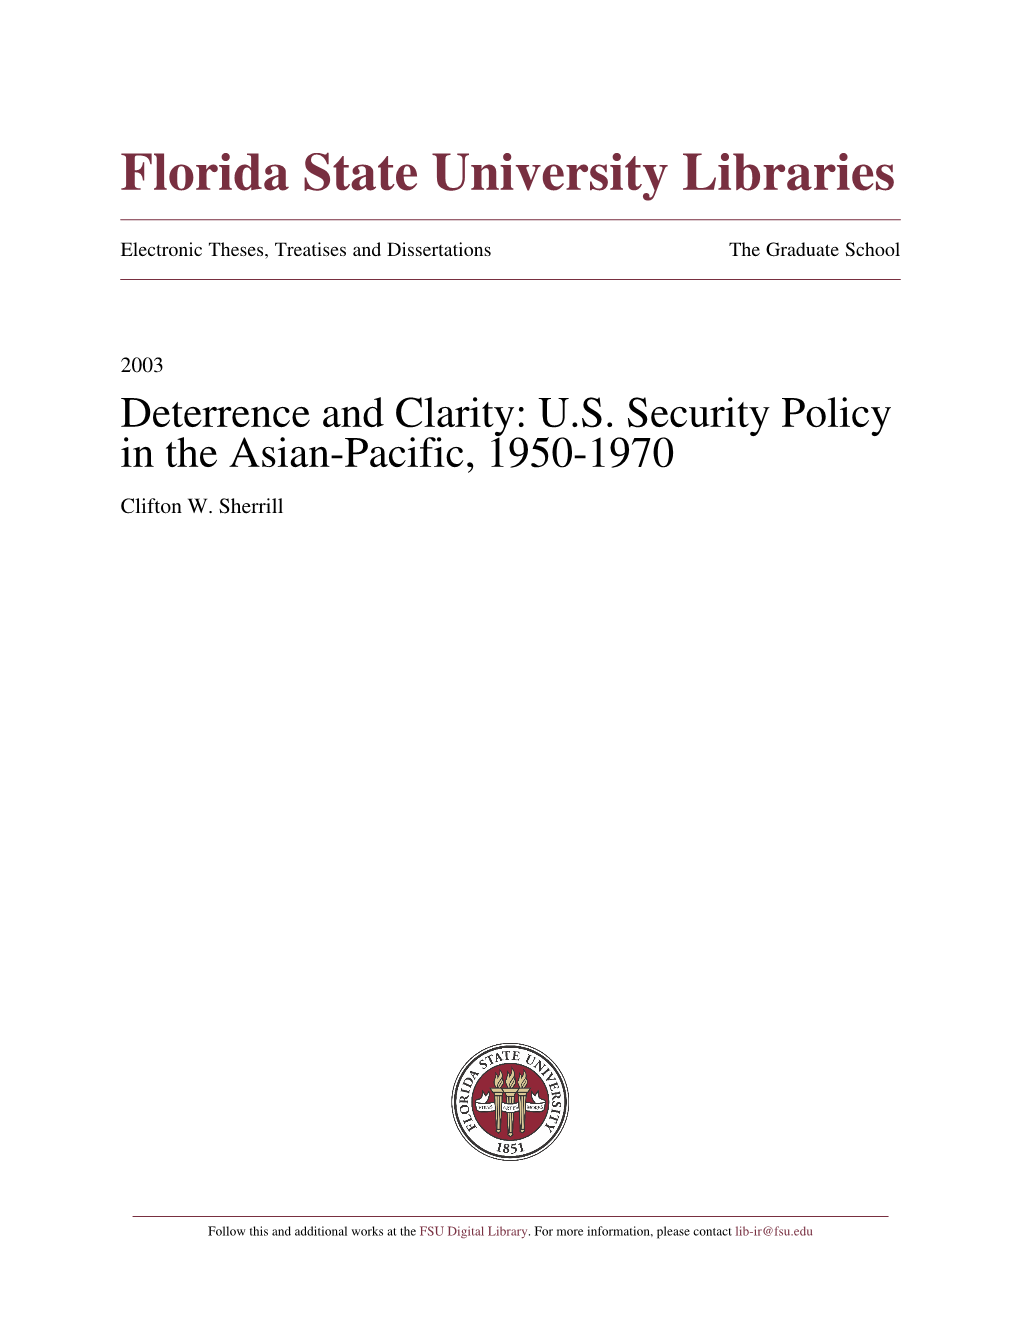 Deterrence and Clarity: U.S. Security Policy in the Asian-Pacific, 1950-1970 Clifton W